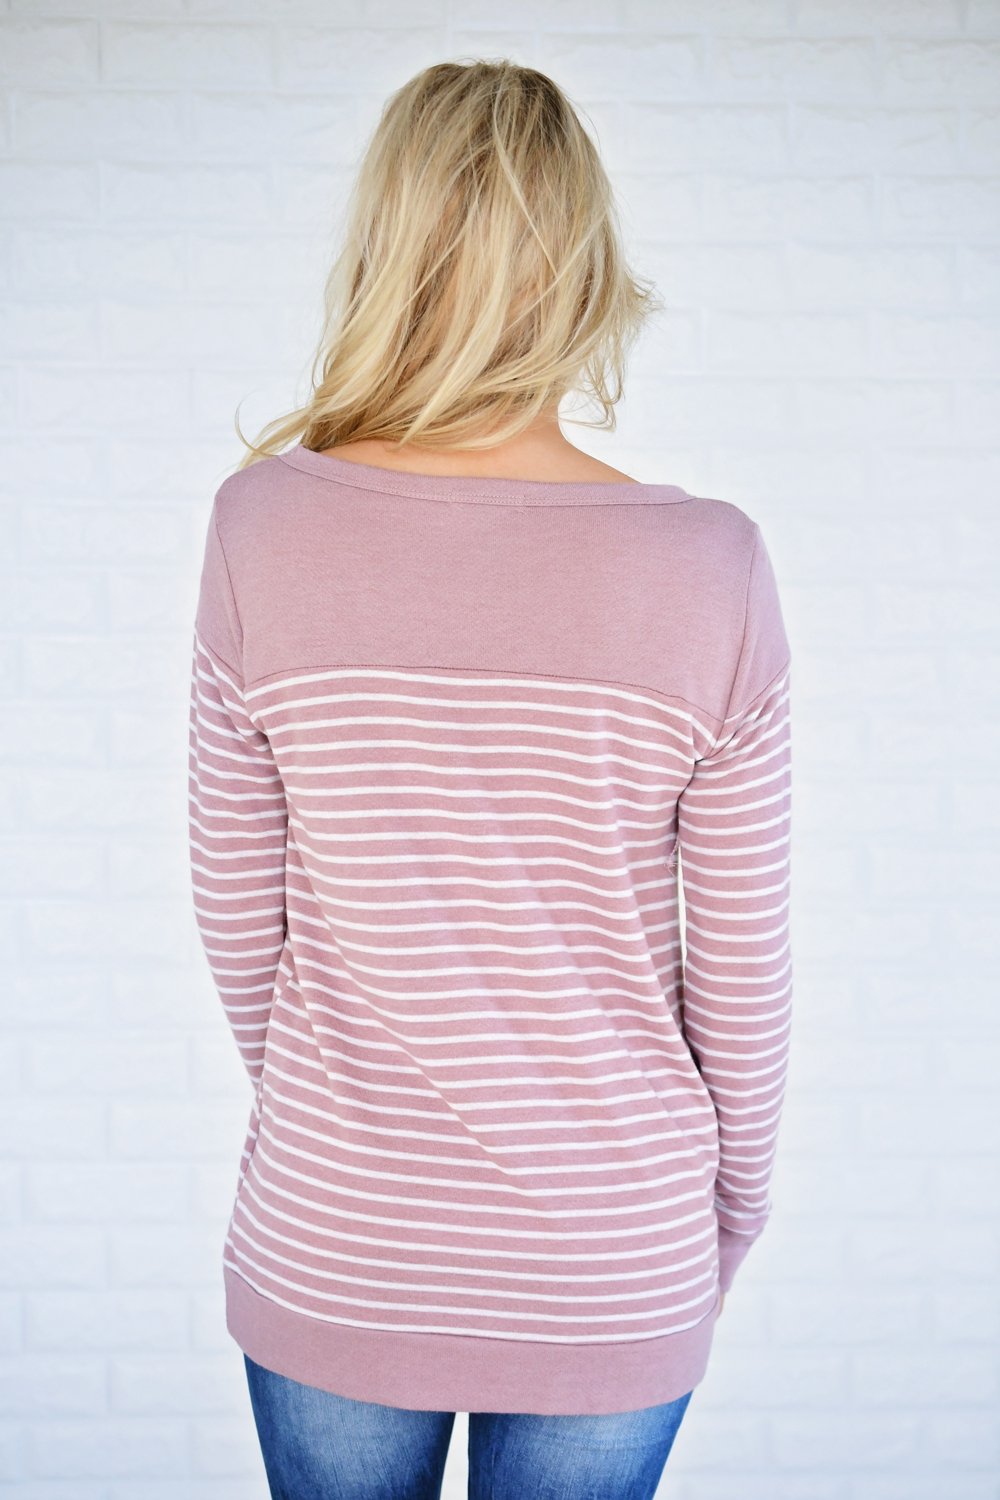 Pleased To Meet You Mauve Striped Top